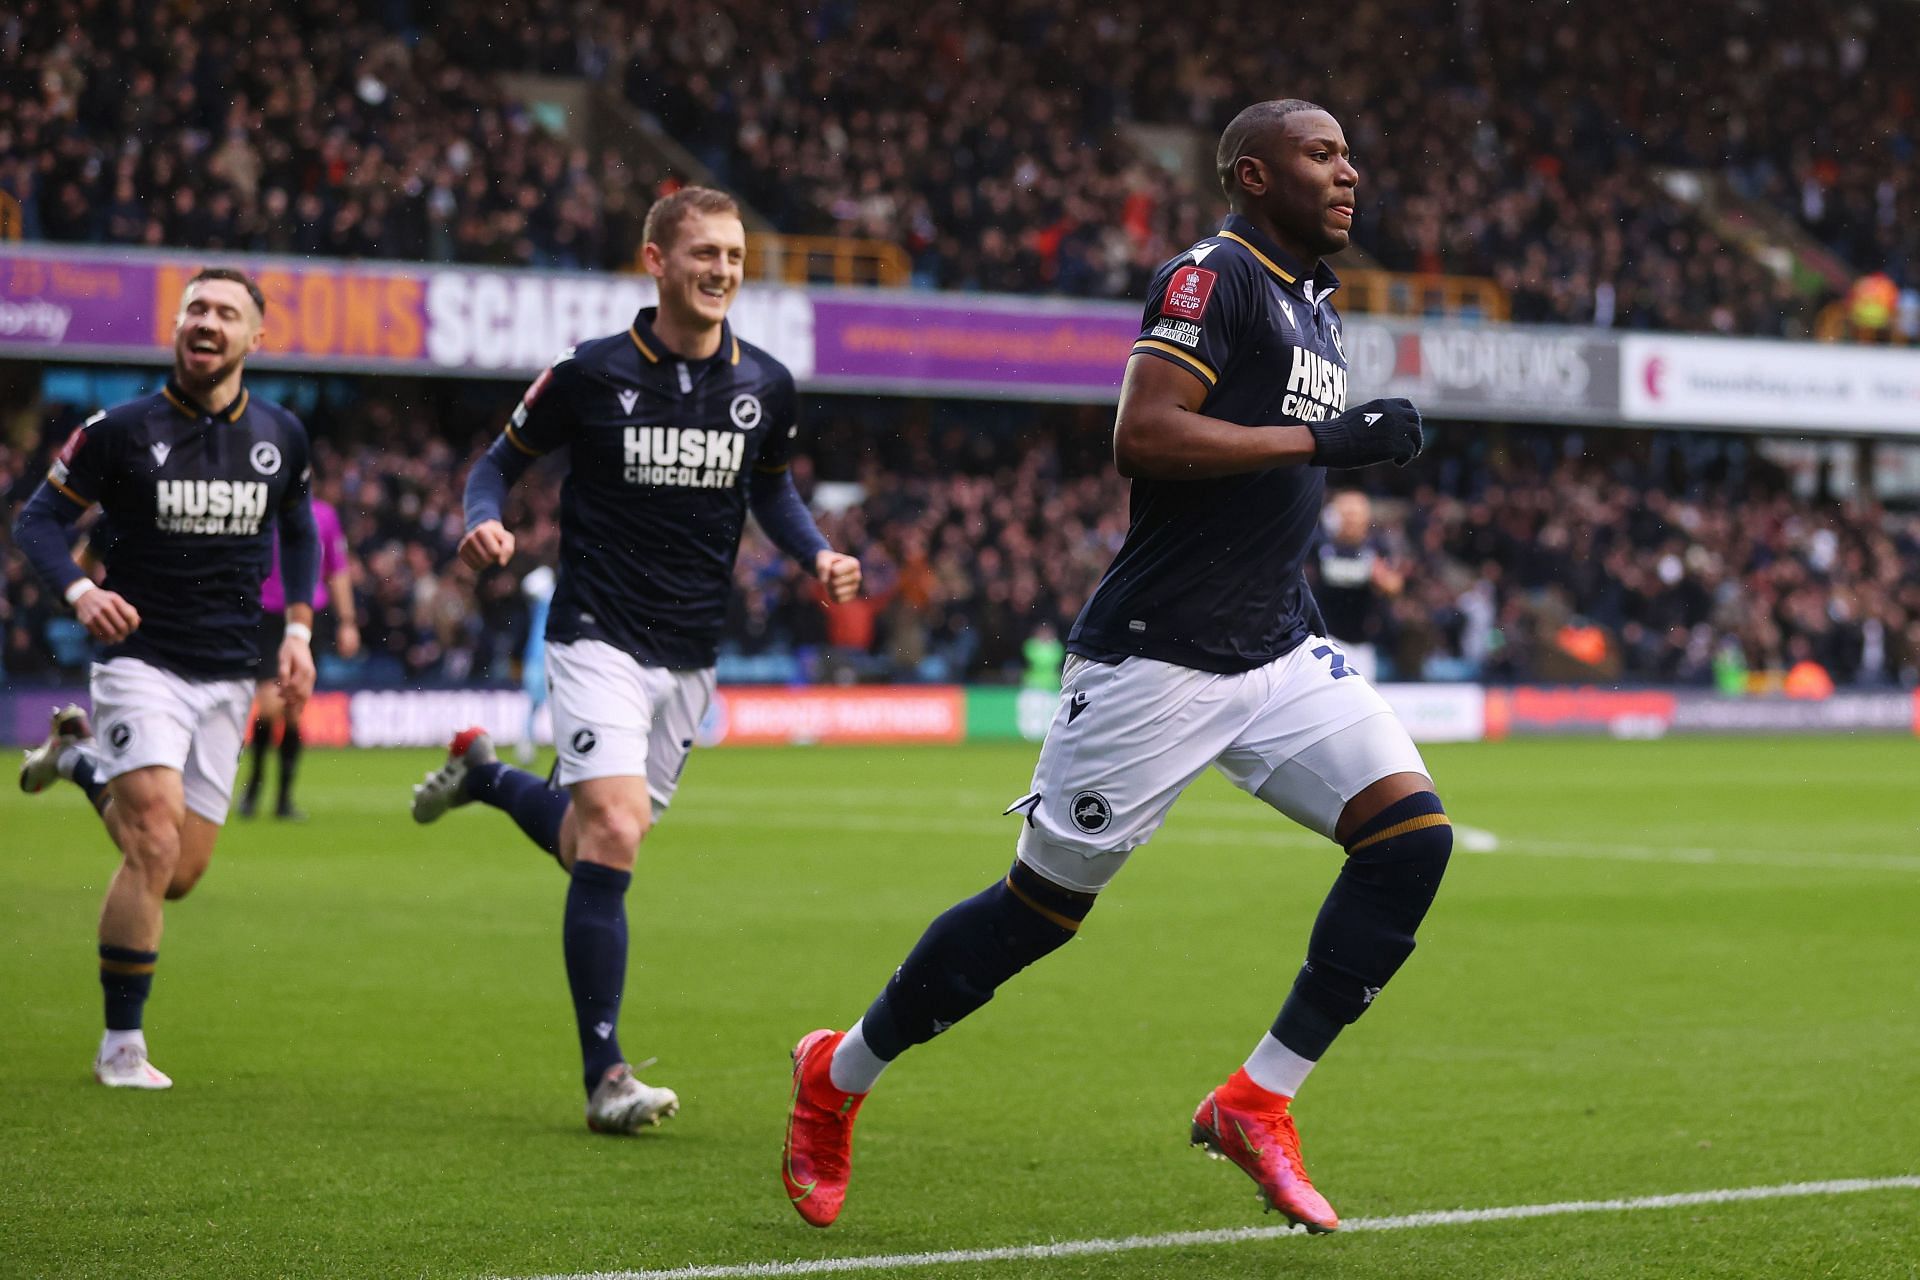 Millwall and West Brom square off in an EFL Championship fixture on Saturday